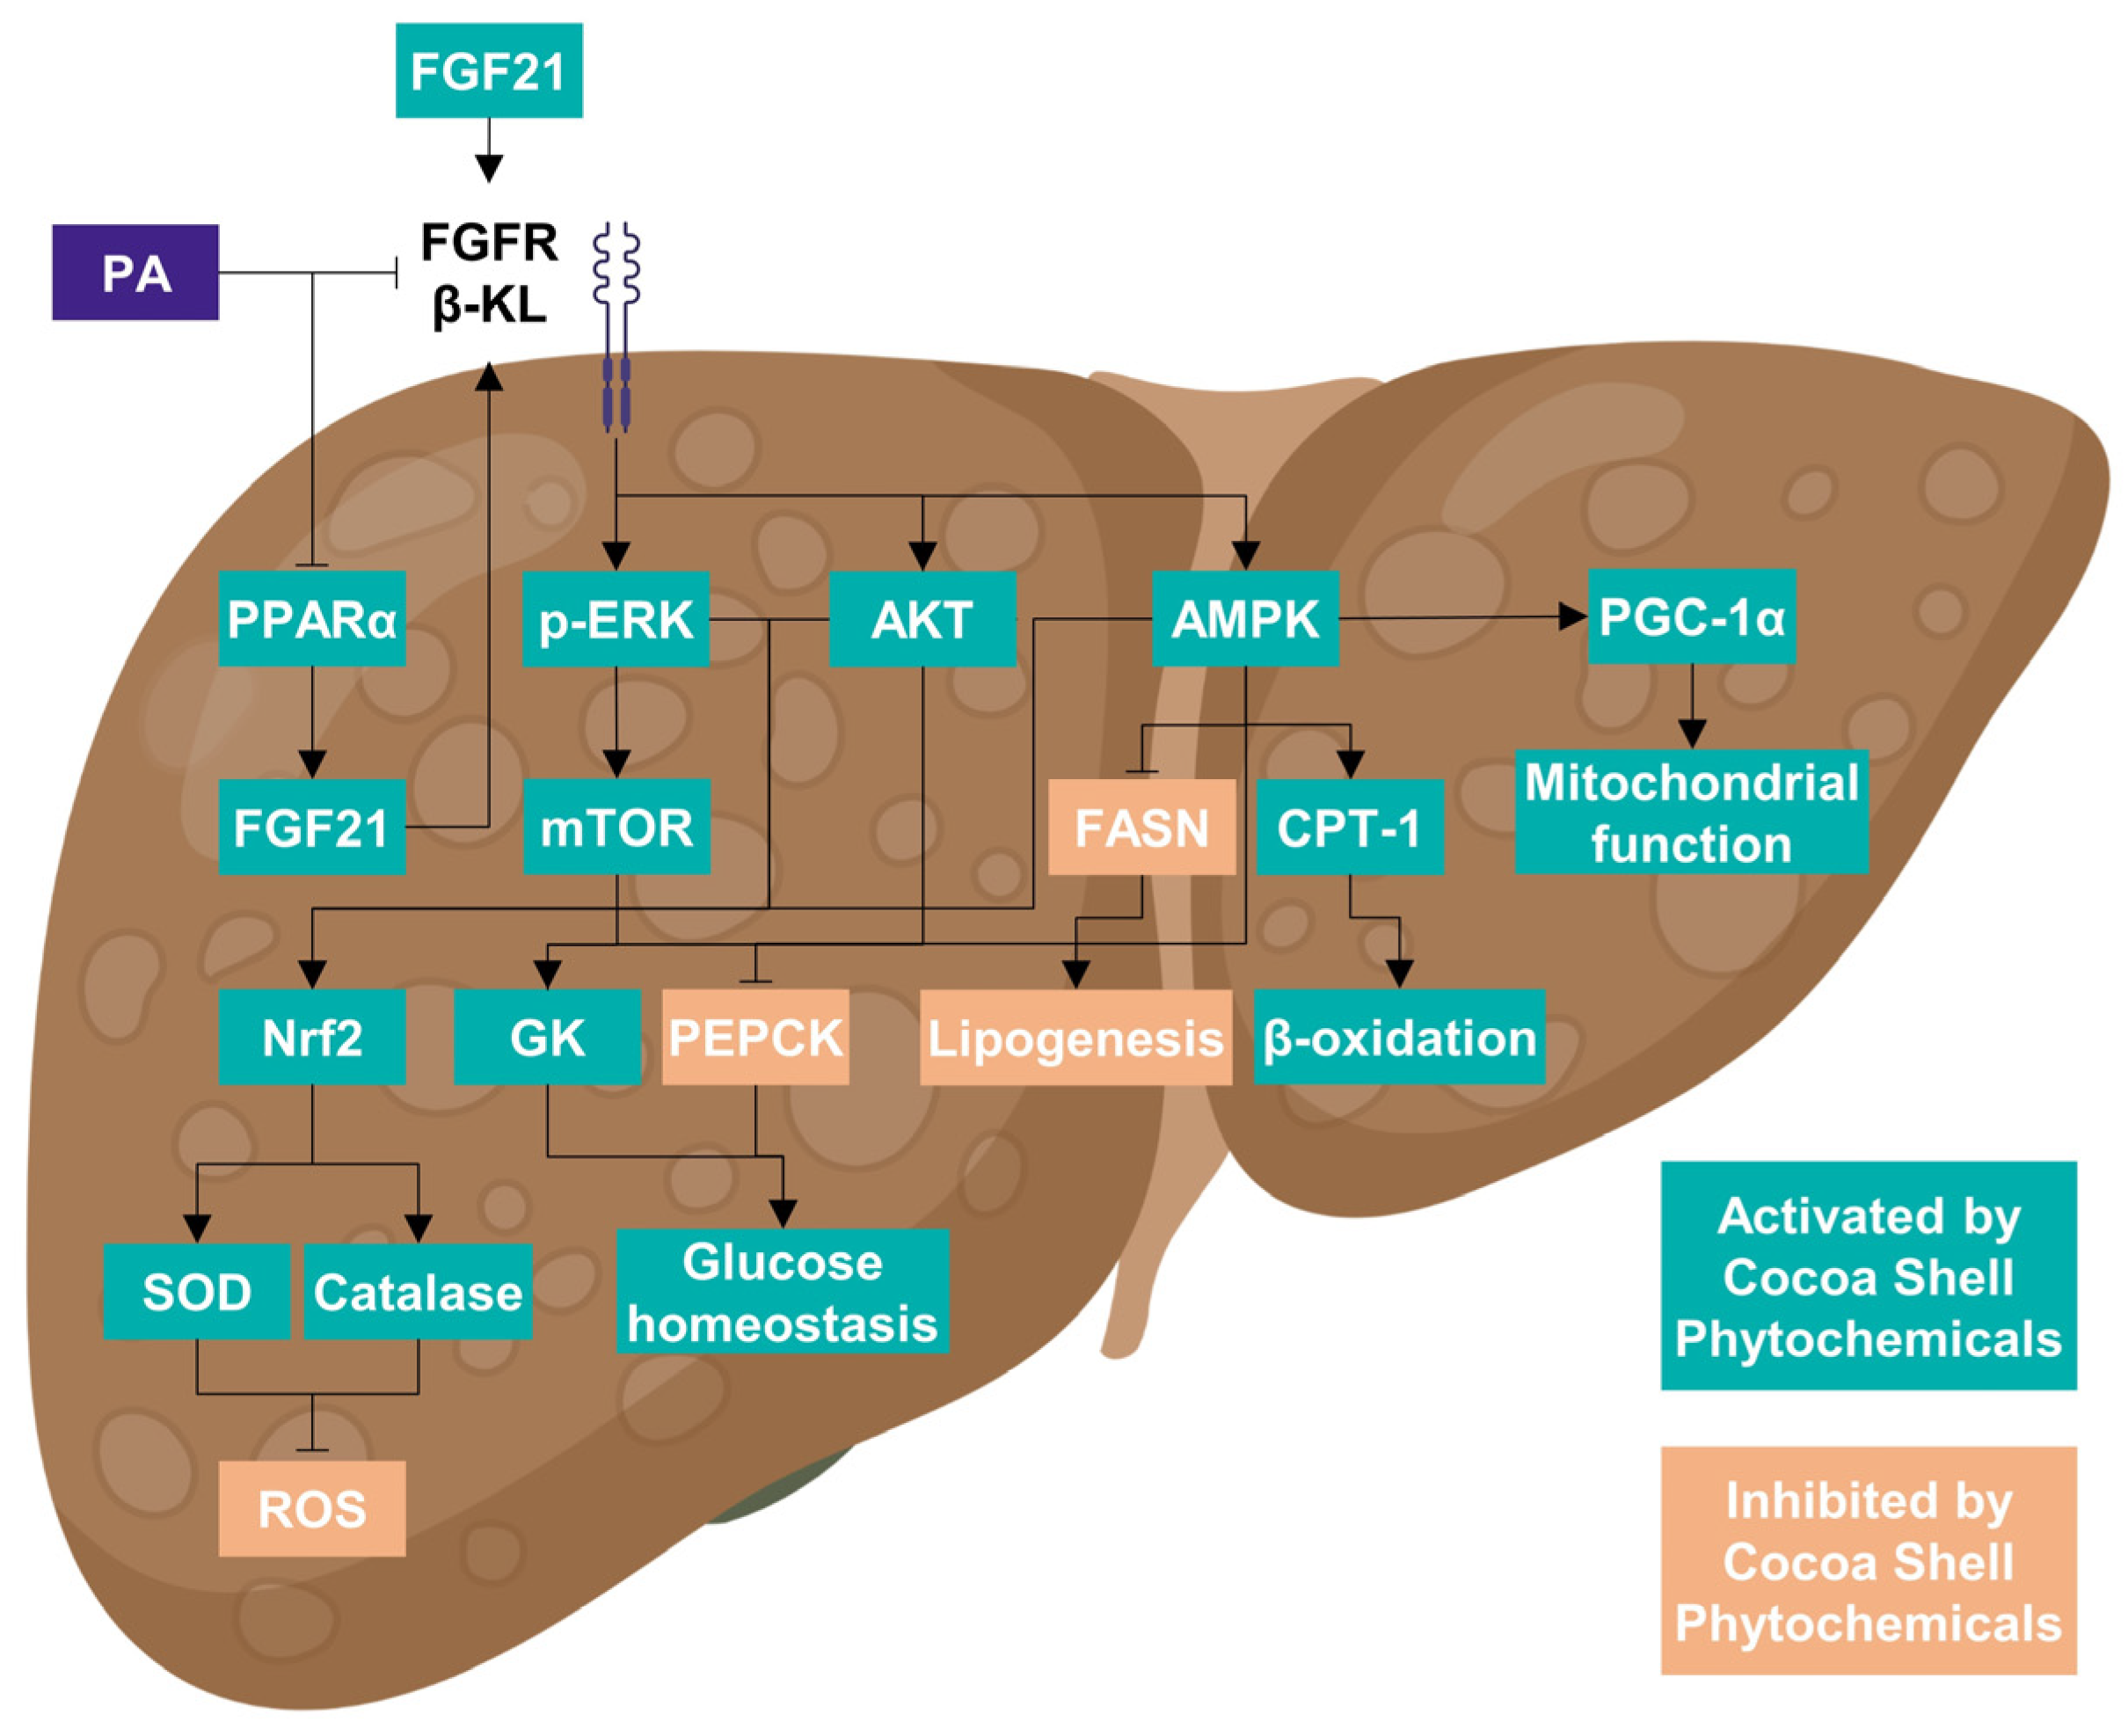 Phytochemicals from the Cocoa Shell Modulate Mitochondrial Function, Lipid and Glucose Metabolism in Hepatocytes via Activation of FGF21/ERK, AKT, and mTOR Pathways